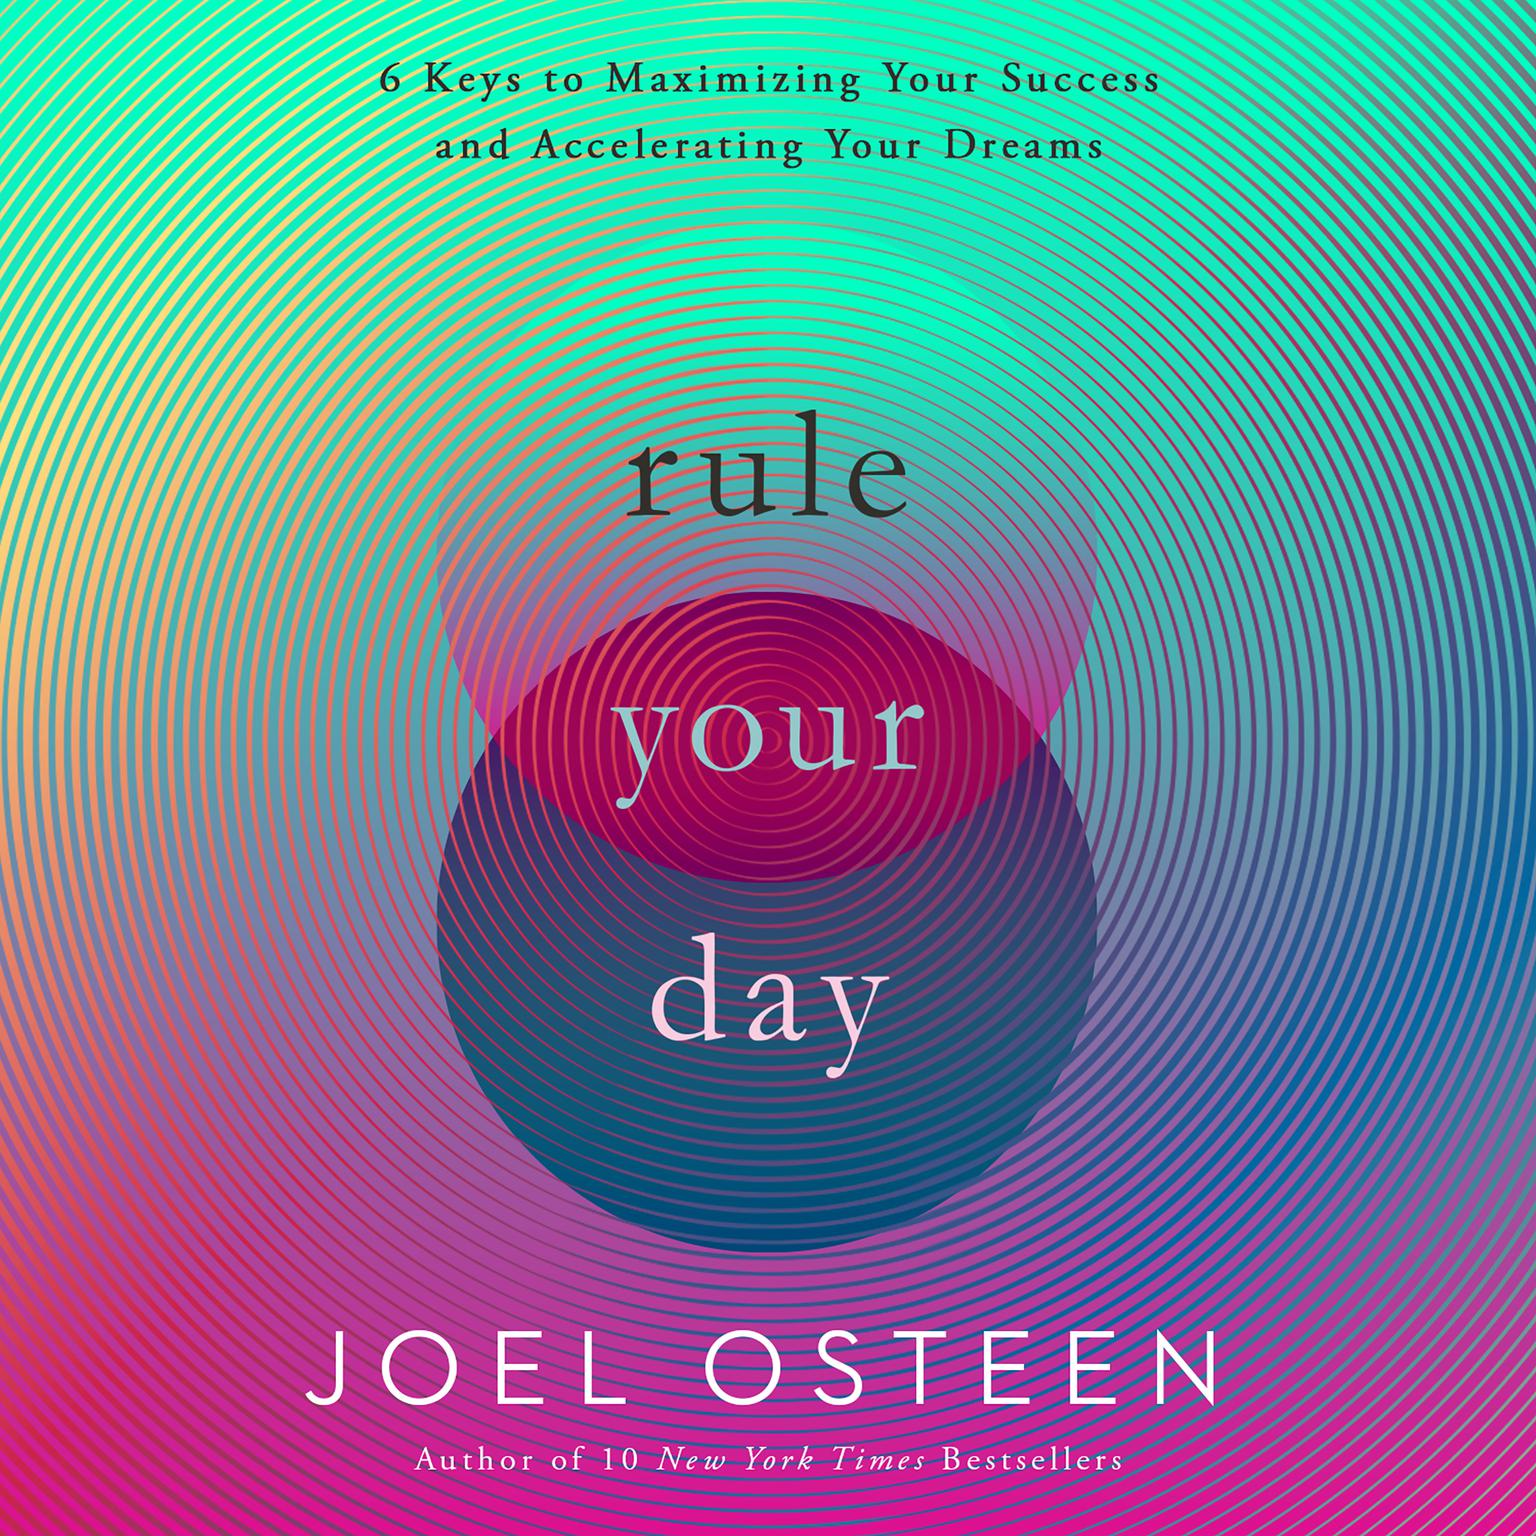 Rule Your Day: 6 Keys to Maximizing Your Success and Accelerating Your Dreams Audiobook, by Joel Osteen